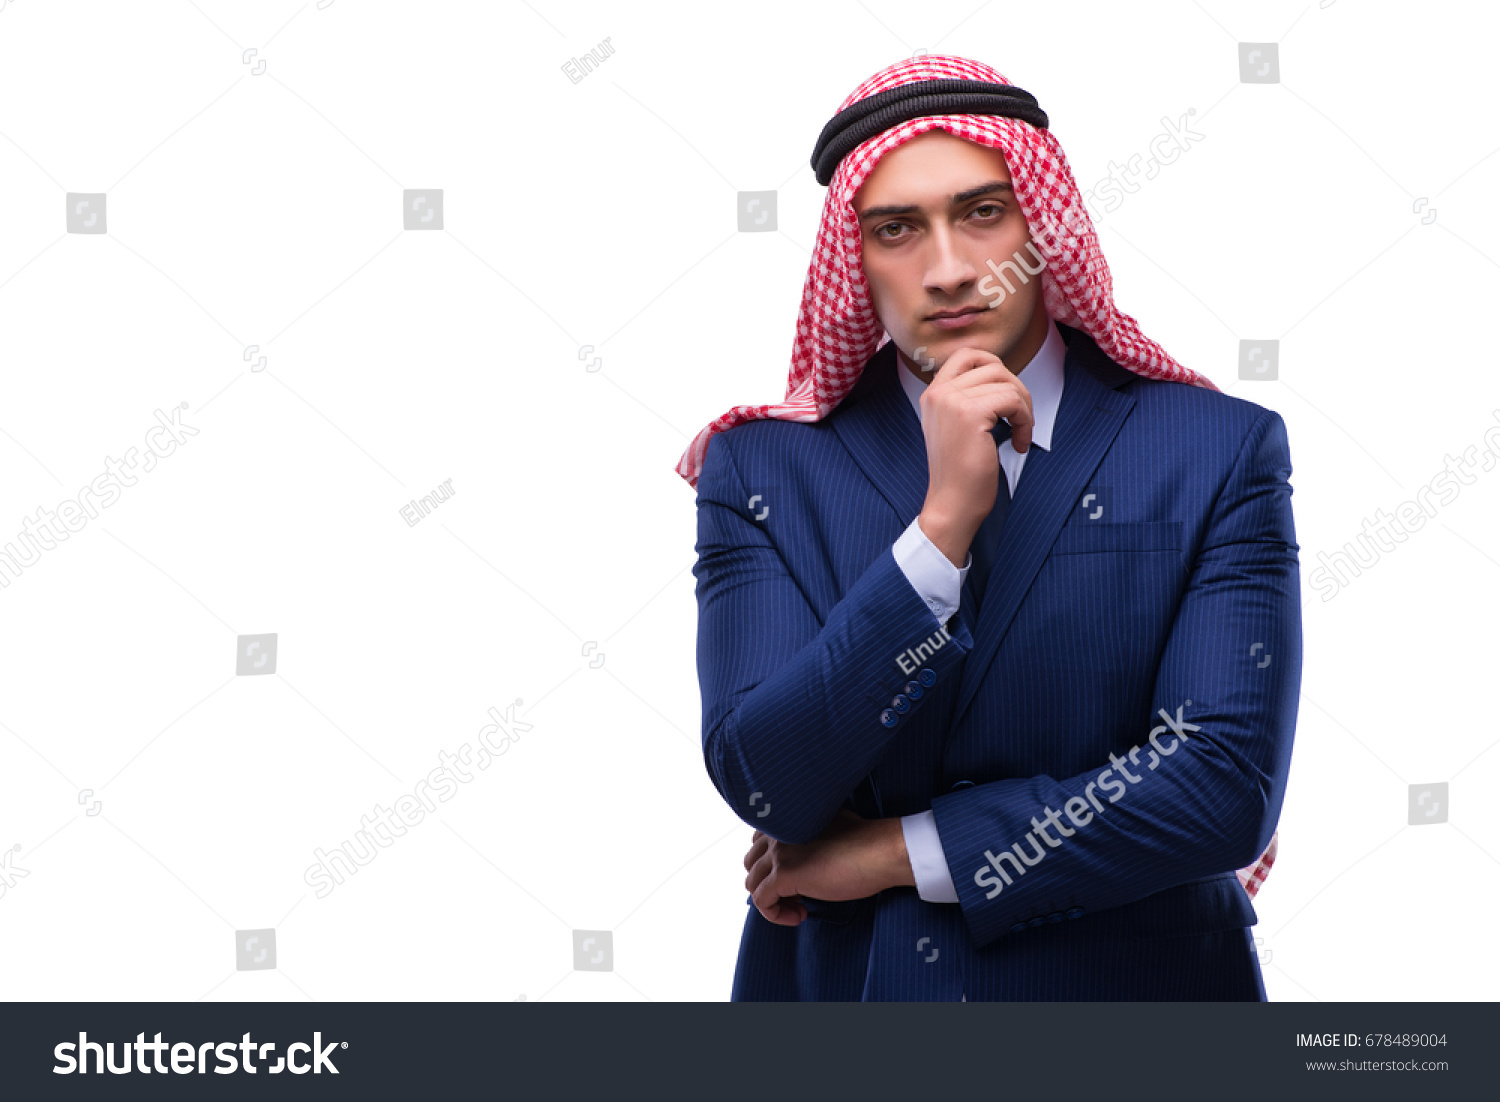 Arab businessman isolated on the white background #678489004